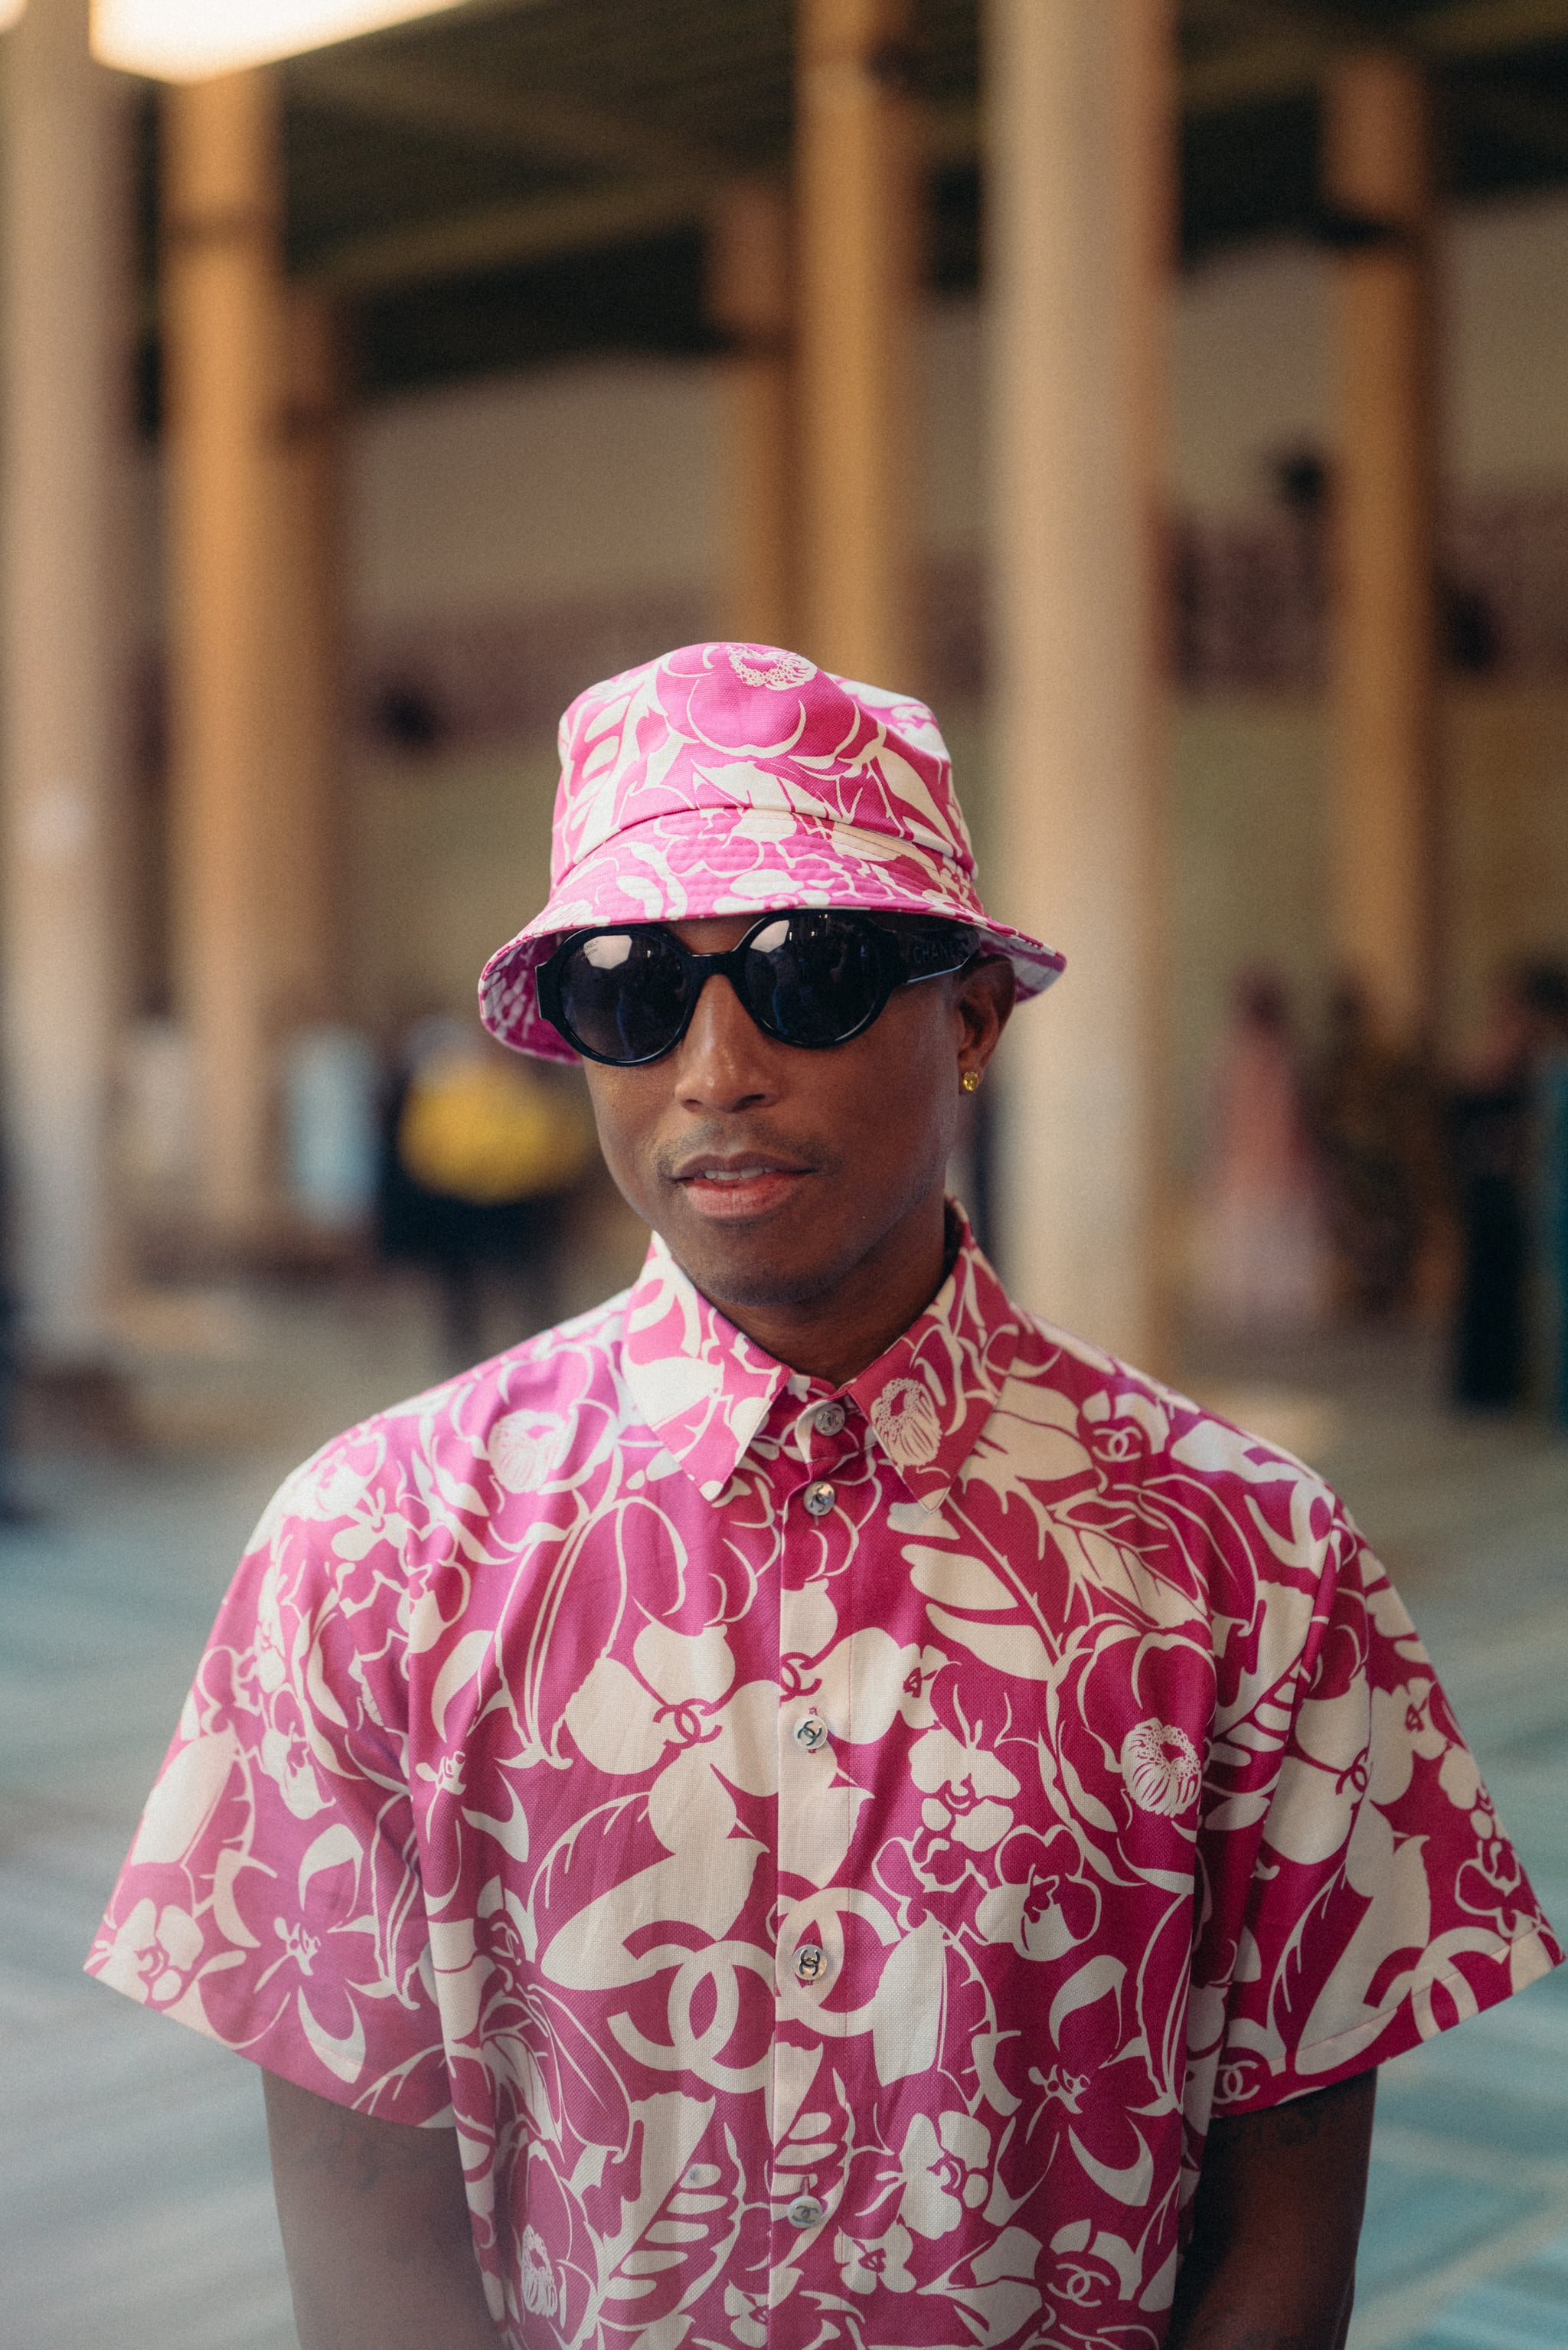 Pharrell Williams at the Chanel Pre-Fall 2023 Show in Senegal | Chanel Drew  Inspiration From the '70s For Its Pre-Fall 2023 Show | POPSUGAR Fashion  Photo 3